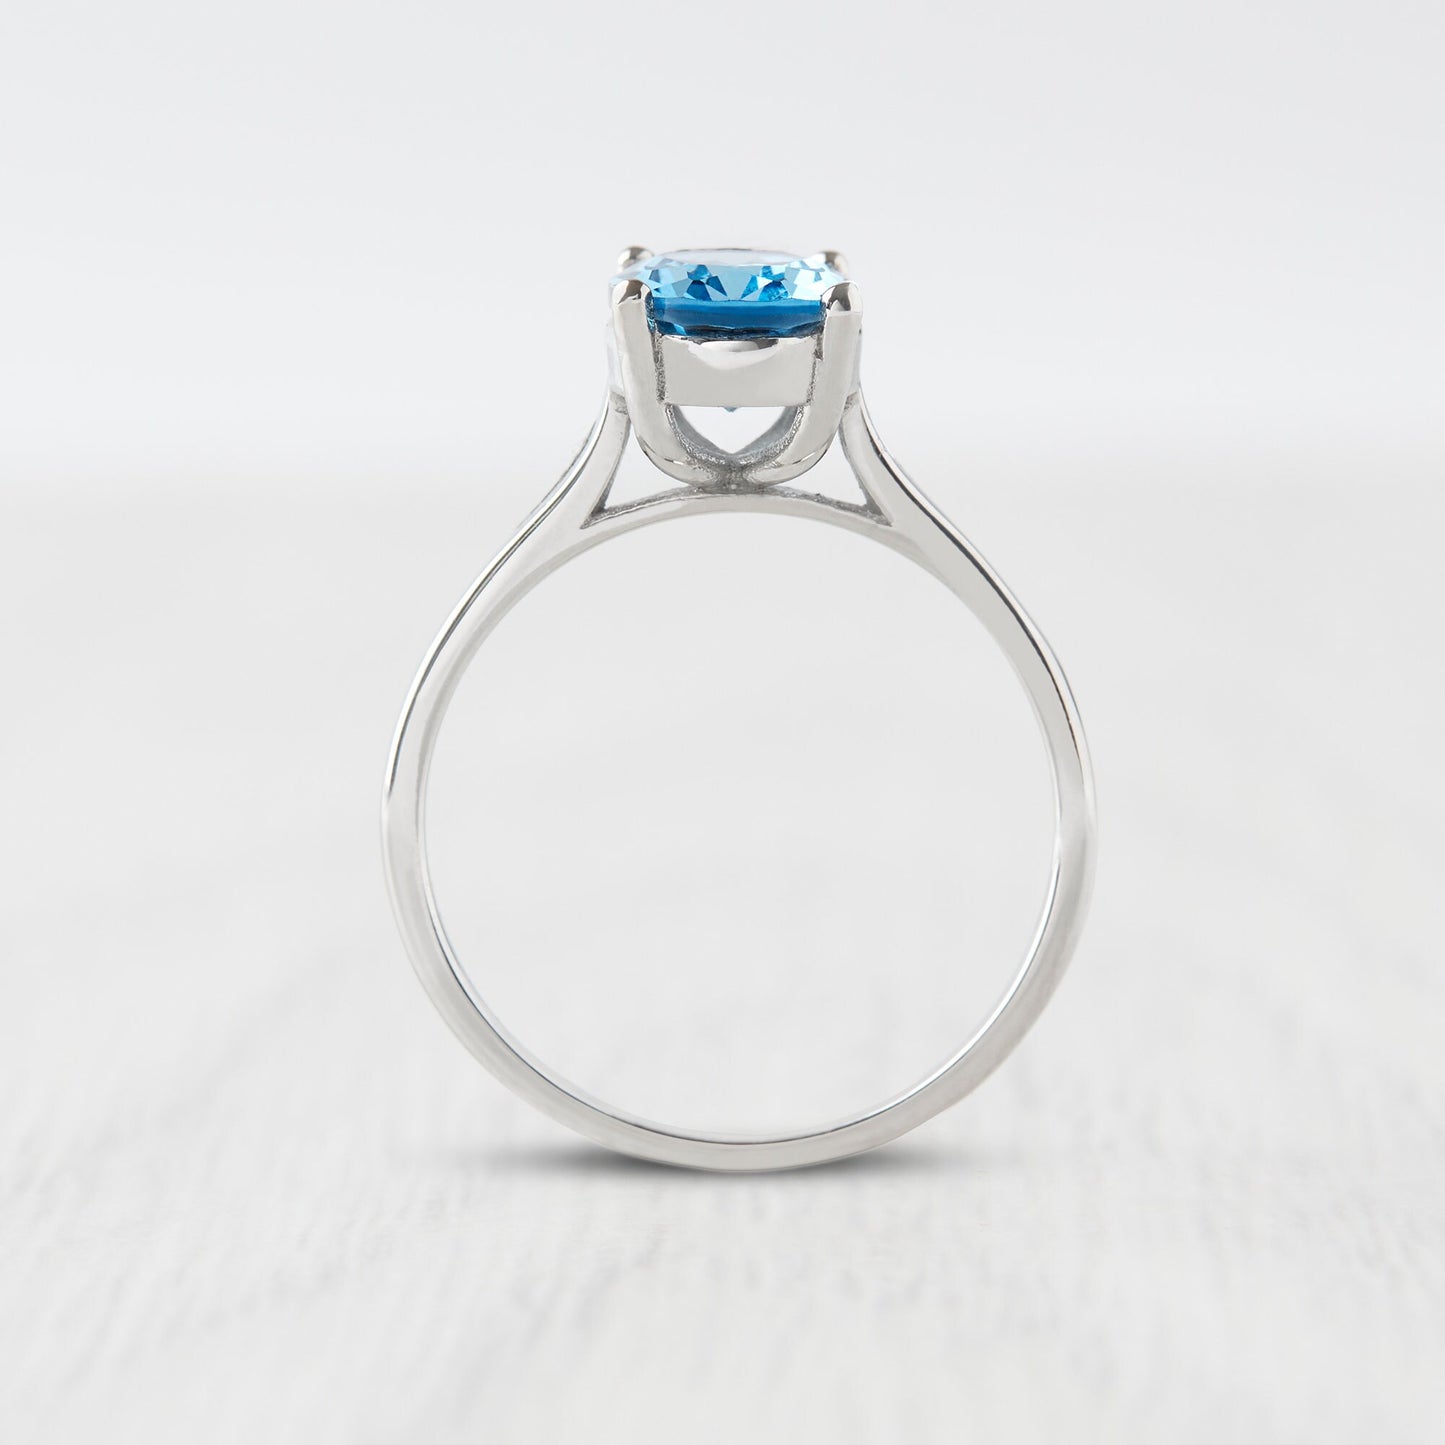 1.7ct Oval Cut natural blue topaz Solitaire cathedral ring in Titanium or White Gold